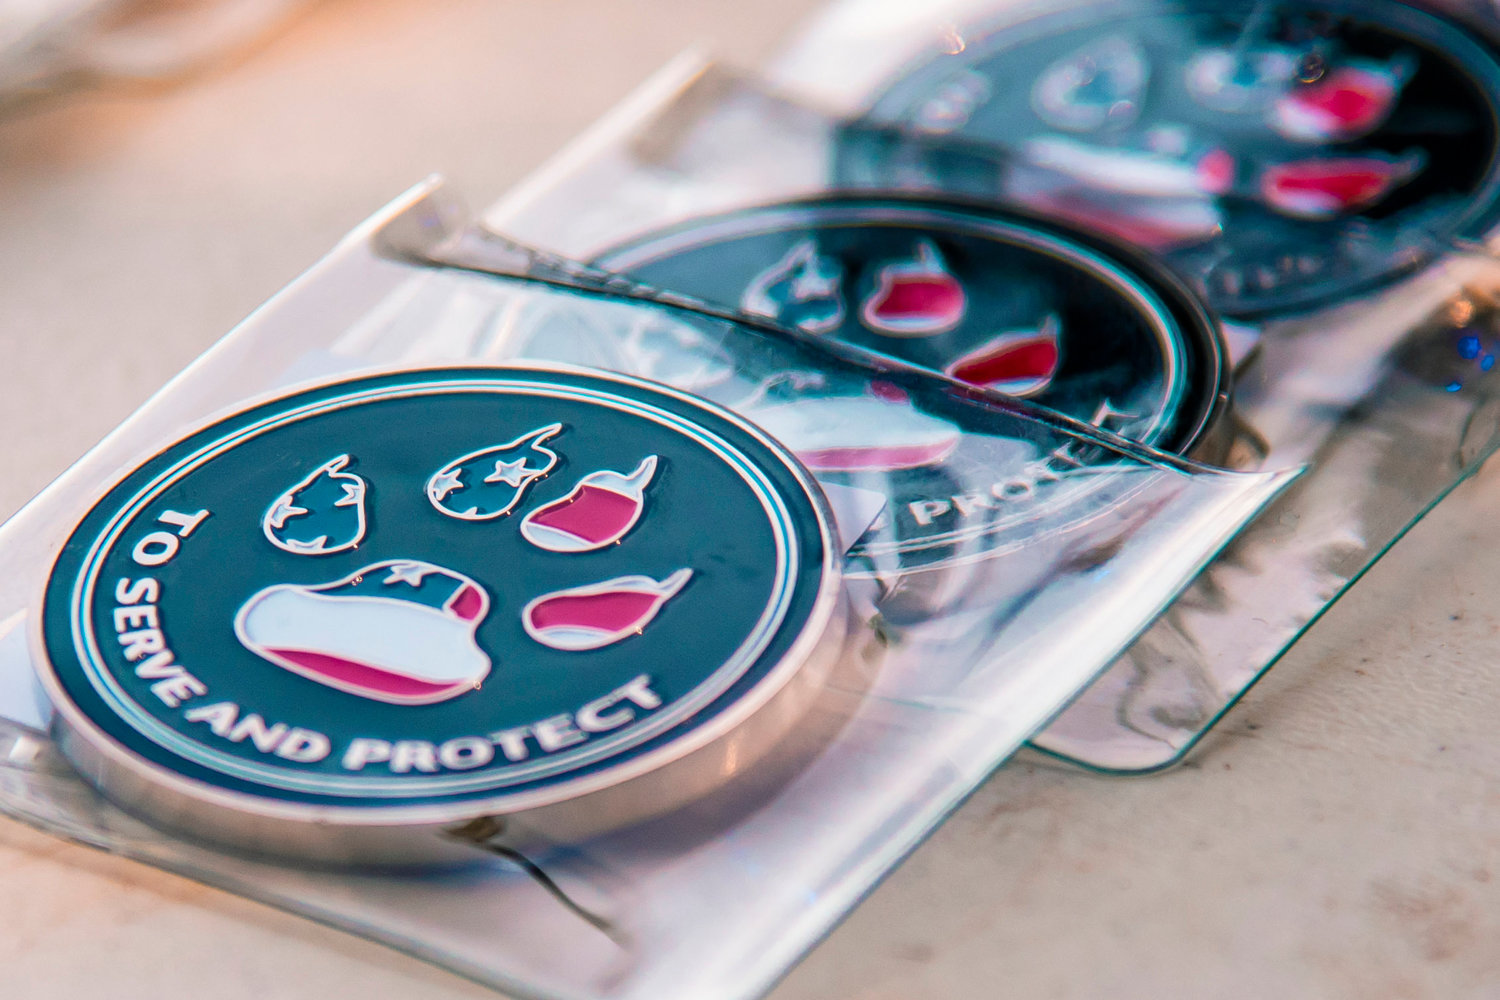 Medallions featuring paws for the K-9 program are displayed during a “Back The Blue” event in Adna.